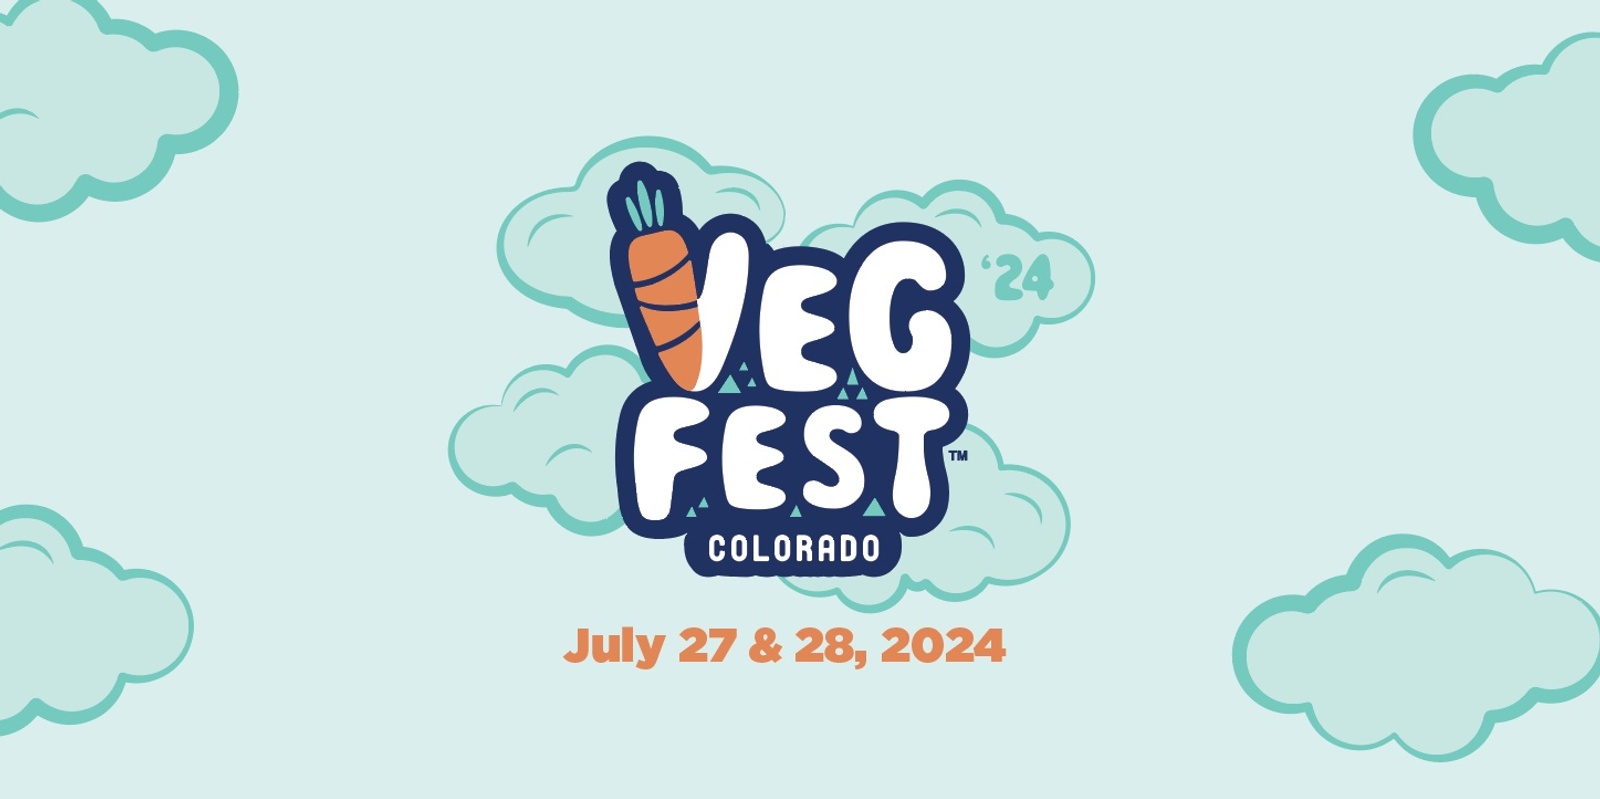 Banner image for VegFest Colorado